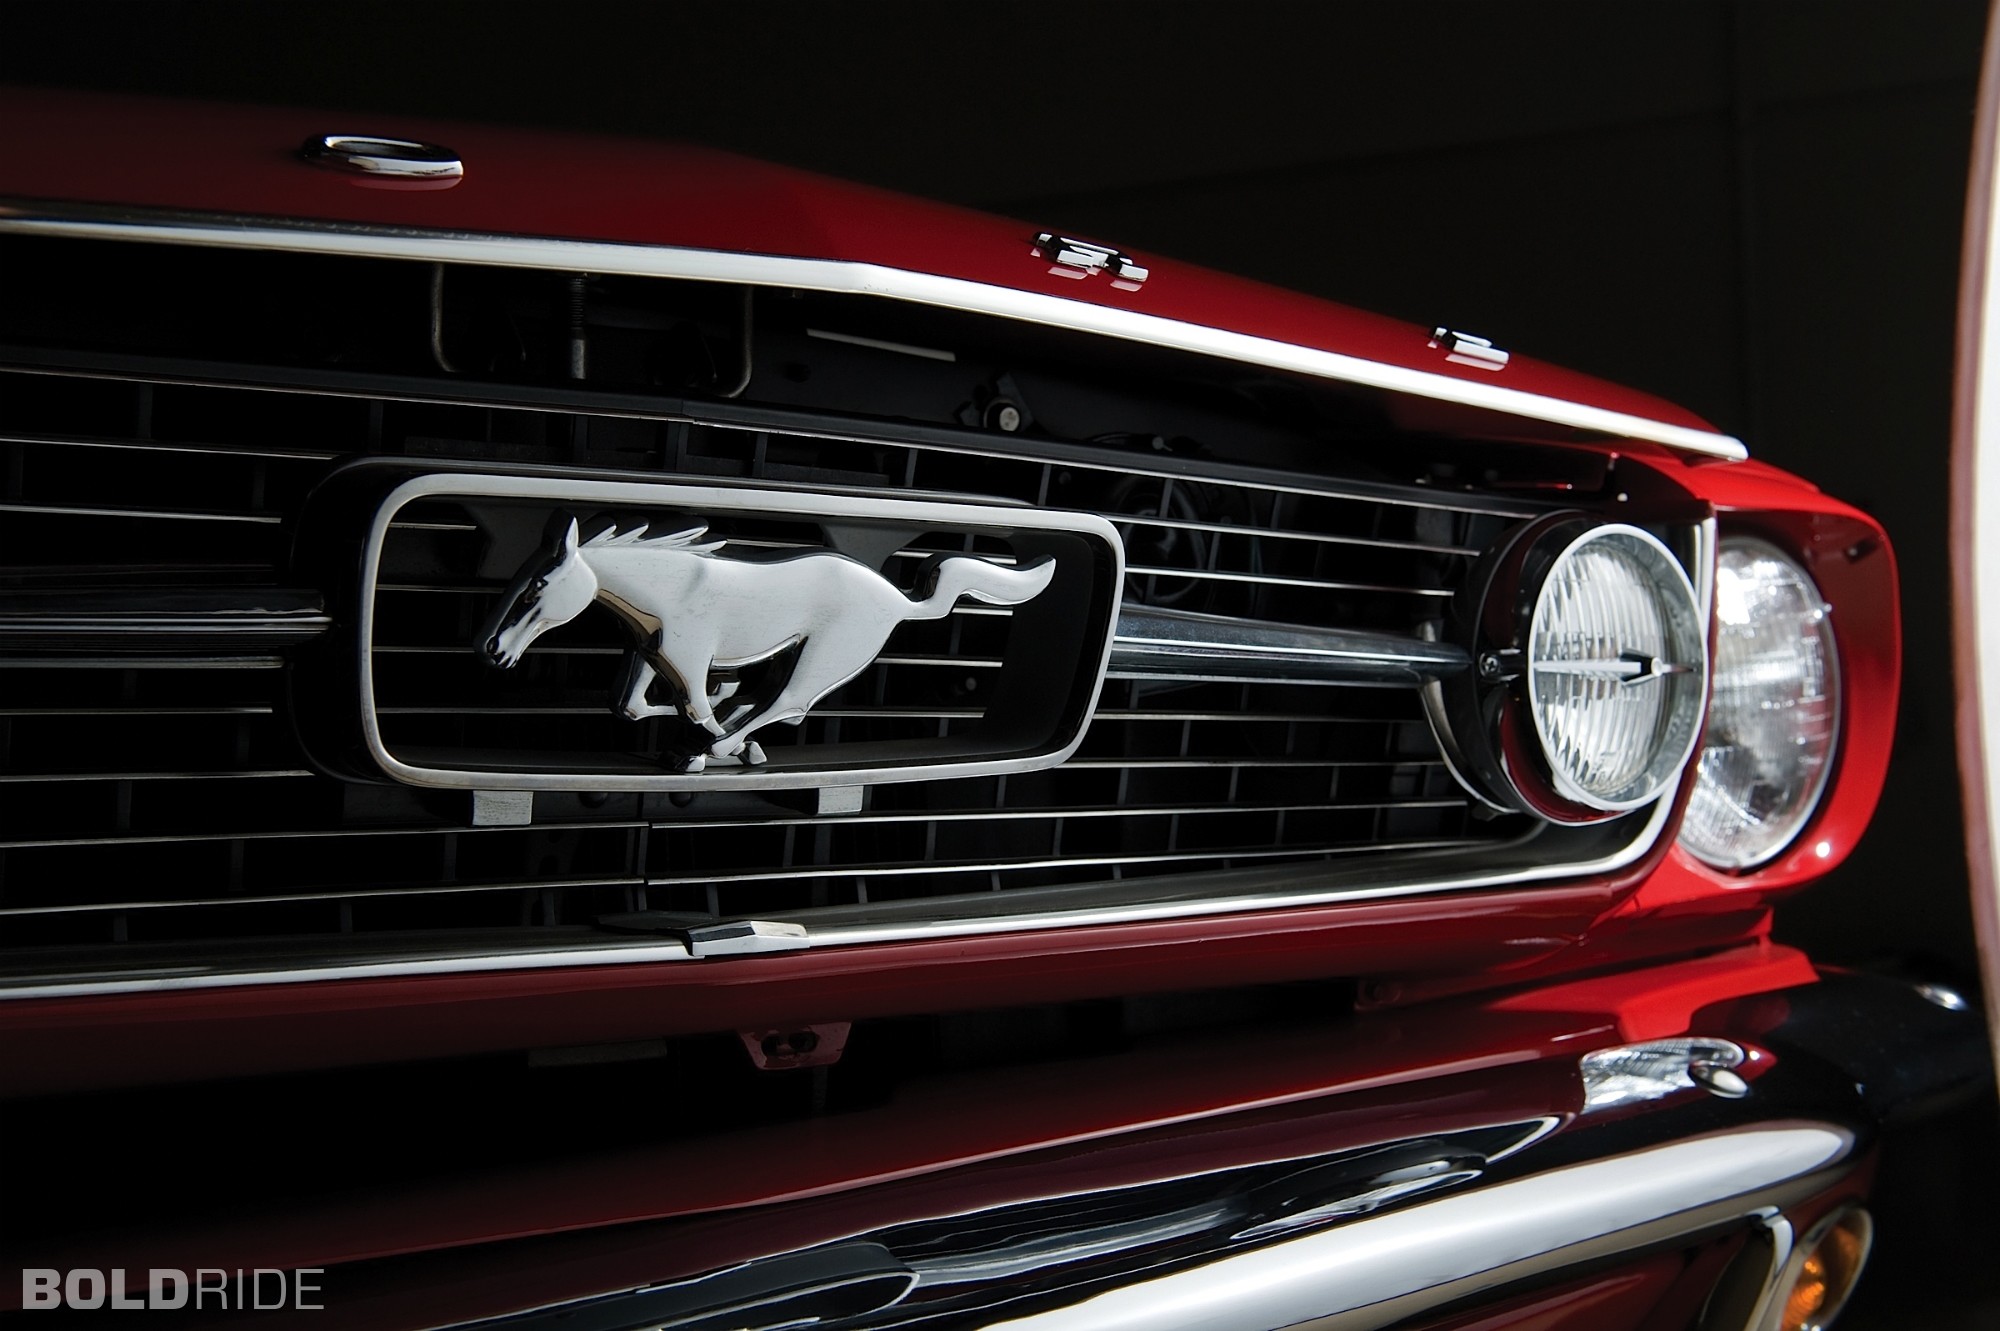 2000x1331 ... ford mustang logo from here : The ...